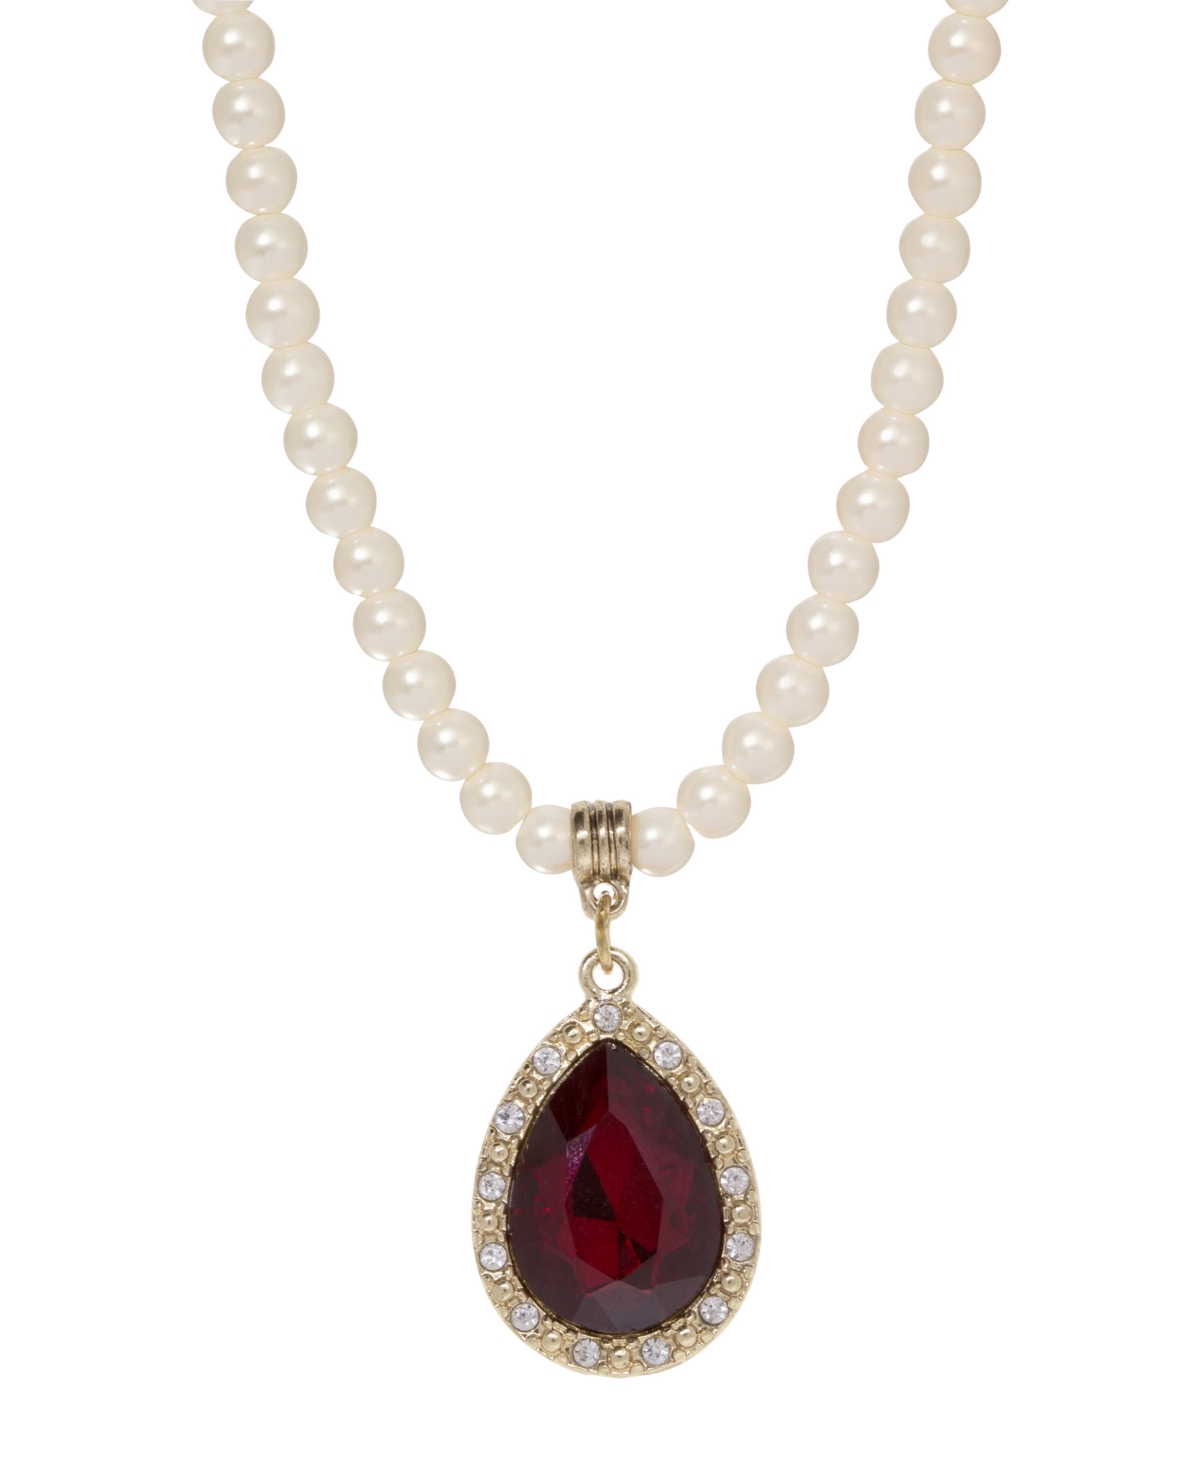 2028 Imitation Pearl Red Glass Crystal Pendant Necklace